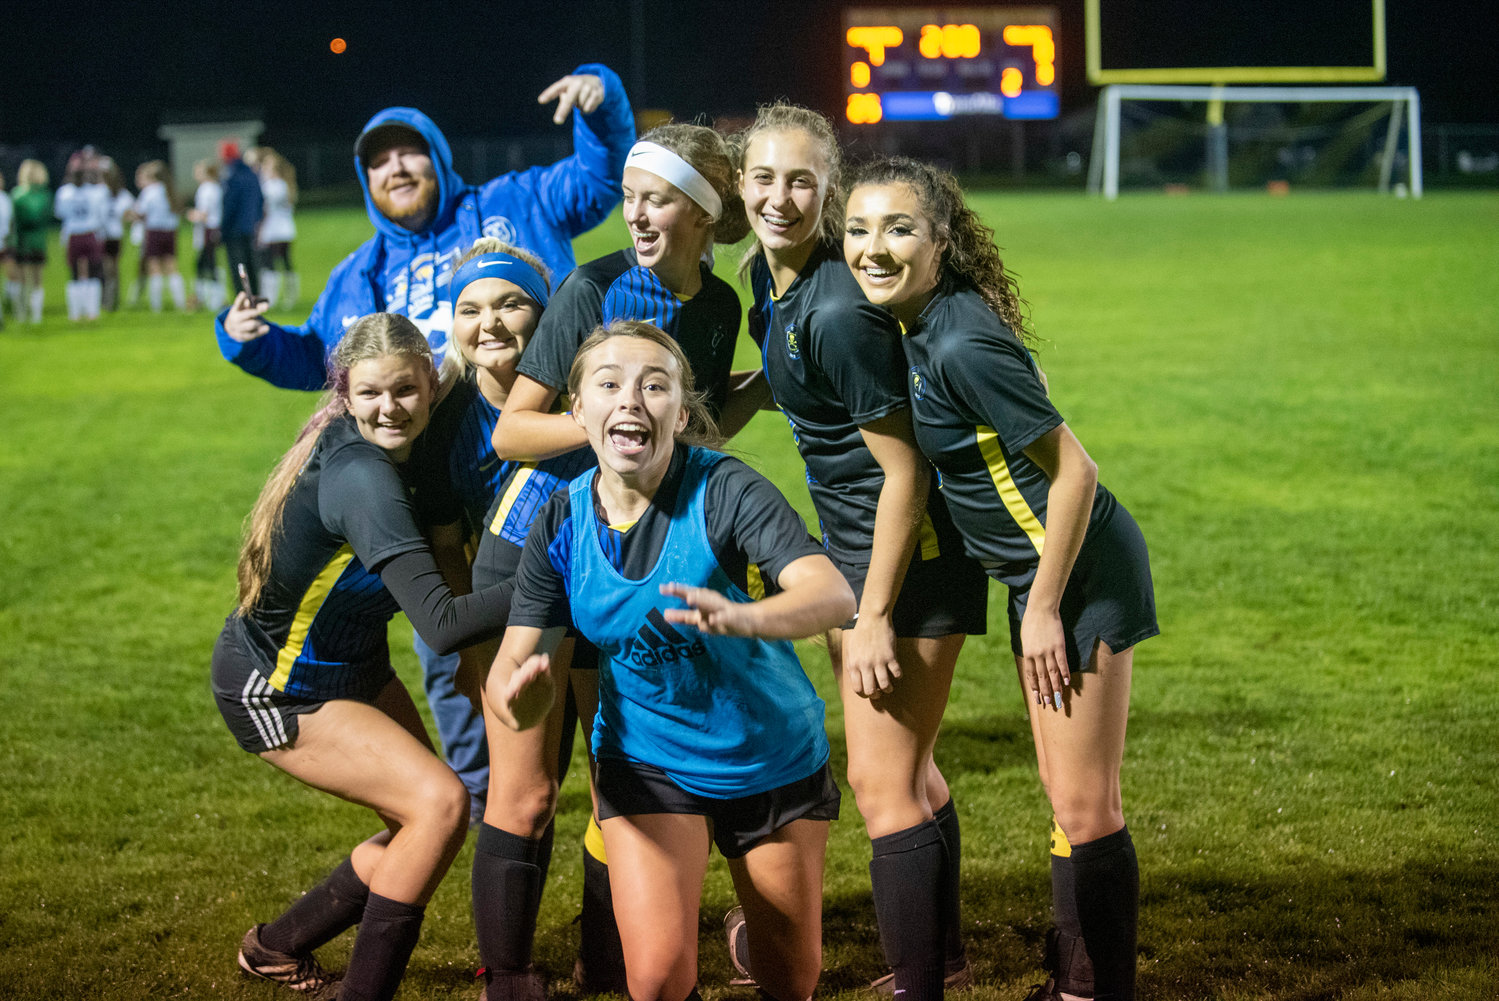 Adna players celebrate after defeating Stevenson in the district playoffs at home Nov. 1.